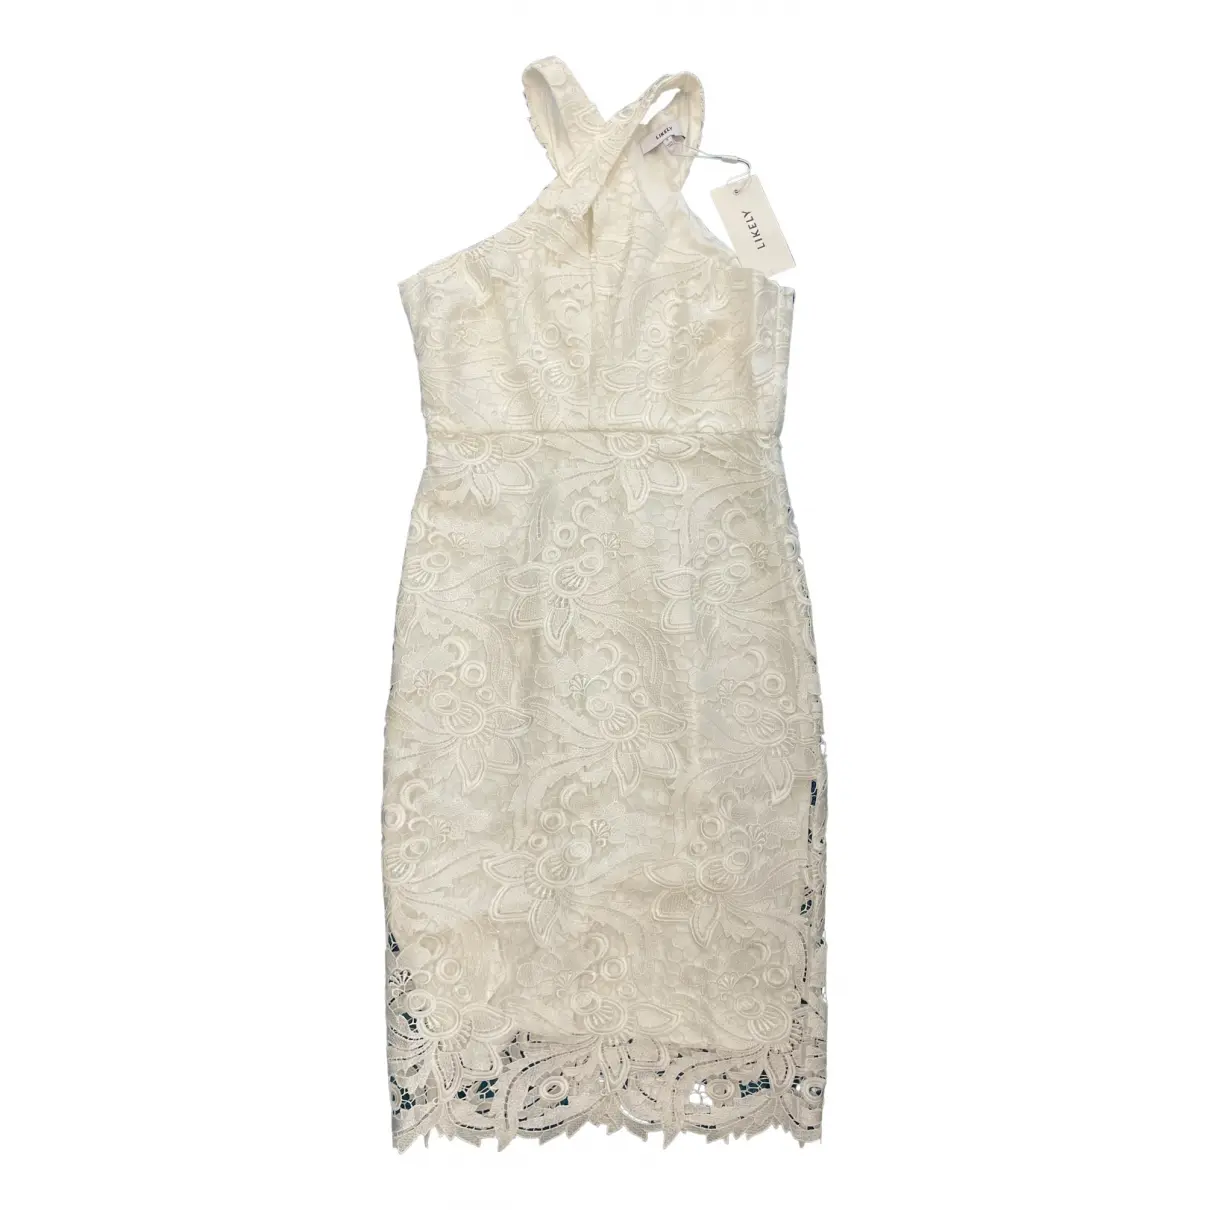 Lace mid-length dress Likely